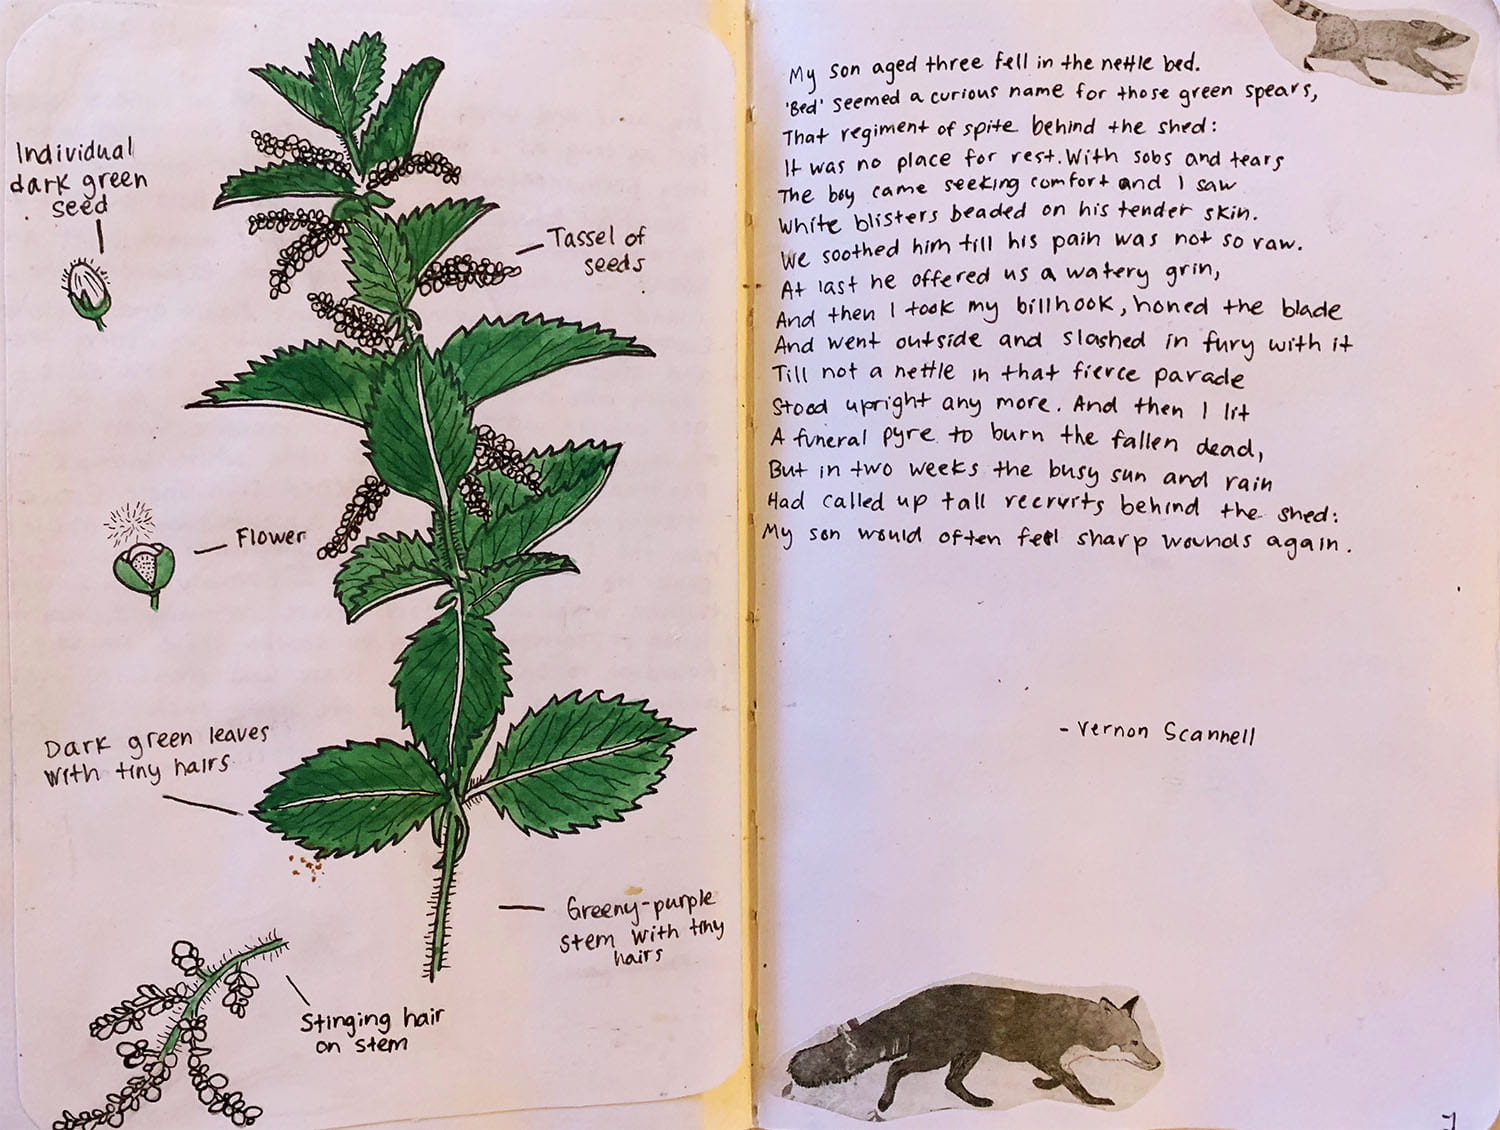 journal entry showing a pen drawing of a plant with labeled parts, a raccoon and a fox, and a story about a boy who was stung by nettles.